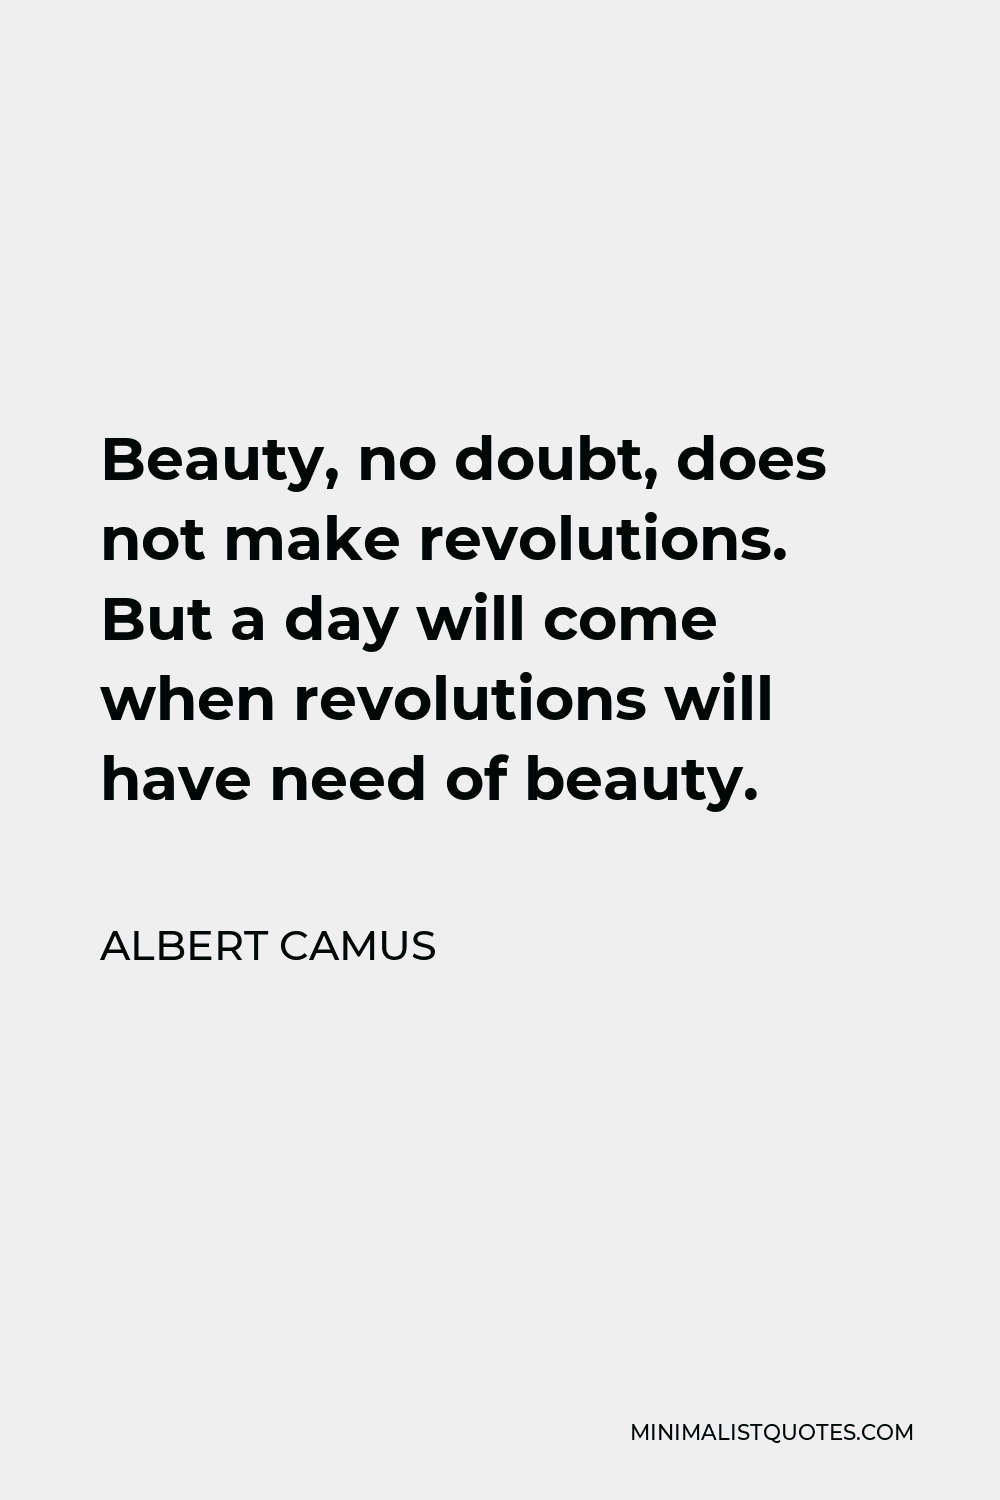 Albert Camus Quote - Beauty, no doubt, does not make revolutions. But a day will come when revolutions will have need of beauty.